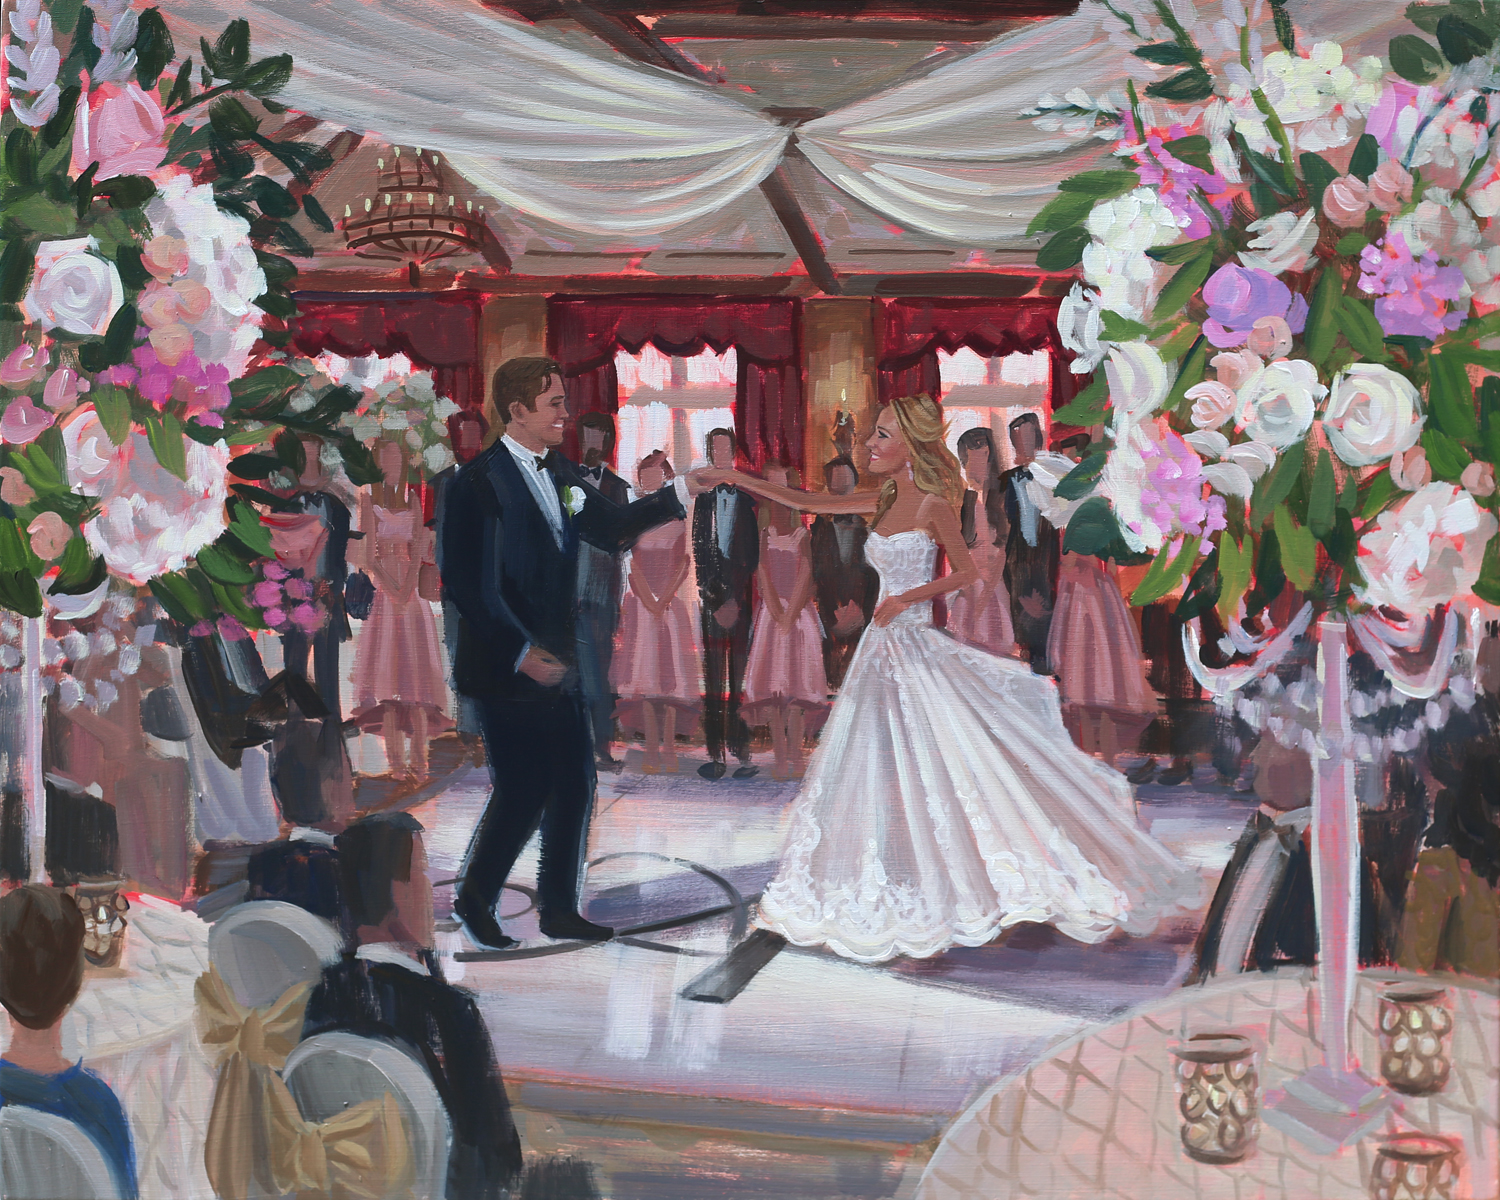 Ponte Vedra's TPC Sawgrass was a spectacular backdrop for Nolyn + Dylan's wedding reception and Ben so enjoyed capturing all the magic with a live painting!